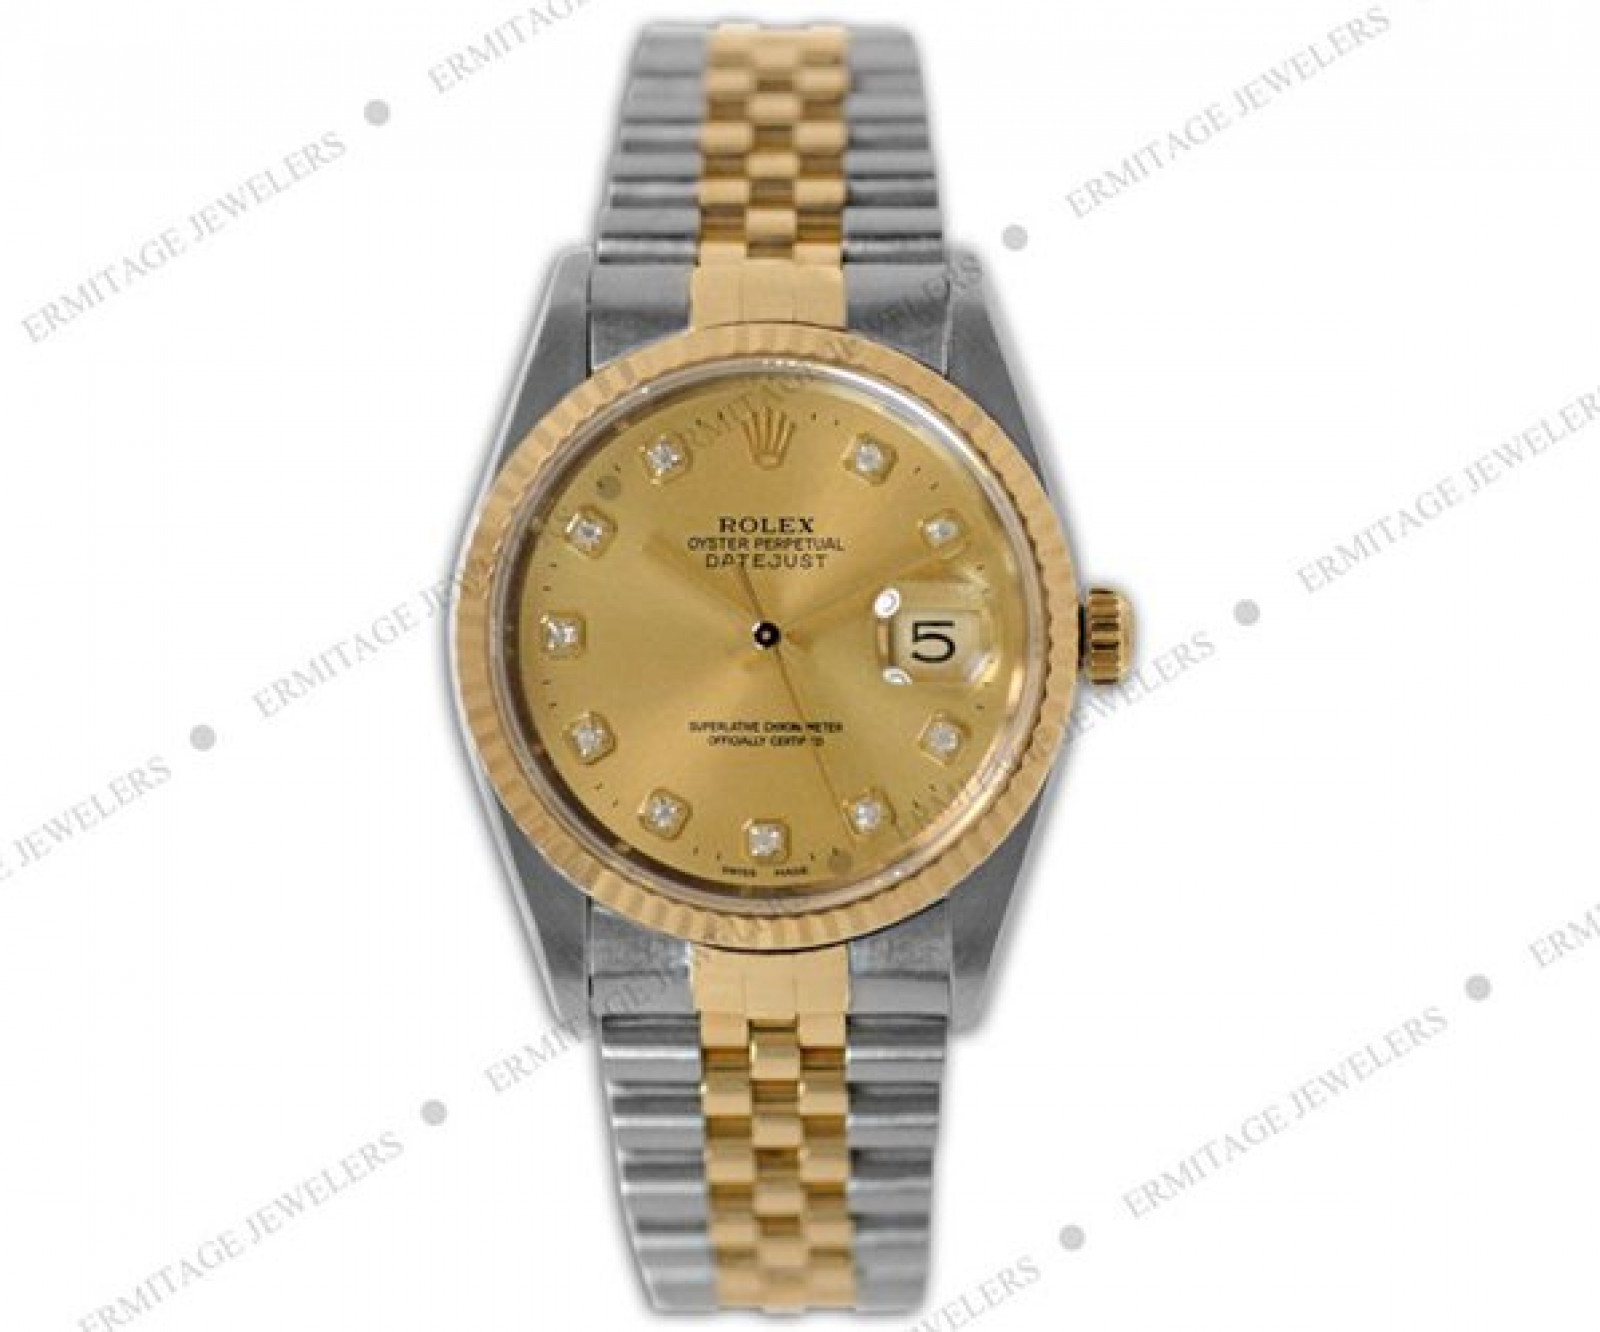 Rolex Datejust 16233 with Diamonds for Men